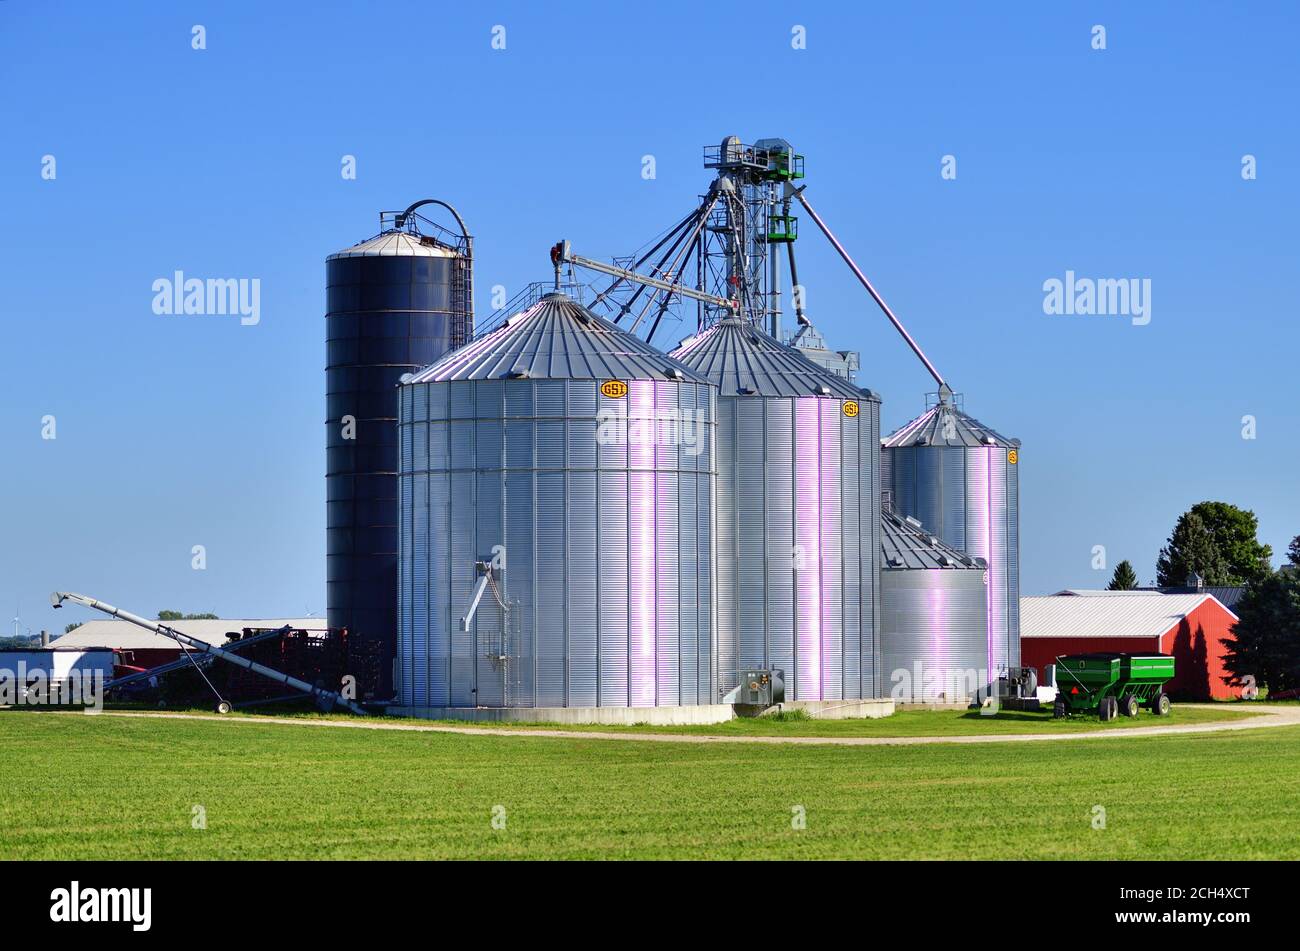 DeKalb, Illinois, USA. Large grain elevators and agricultural cooperative in a north central Illinois community. Stock Photo